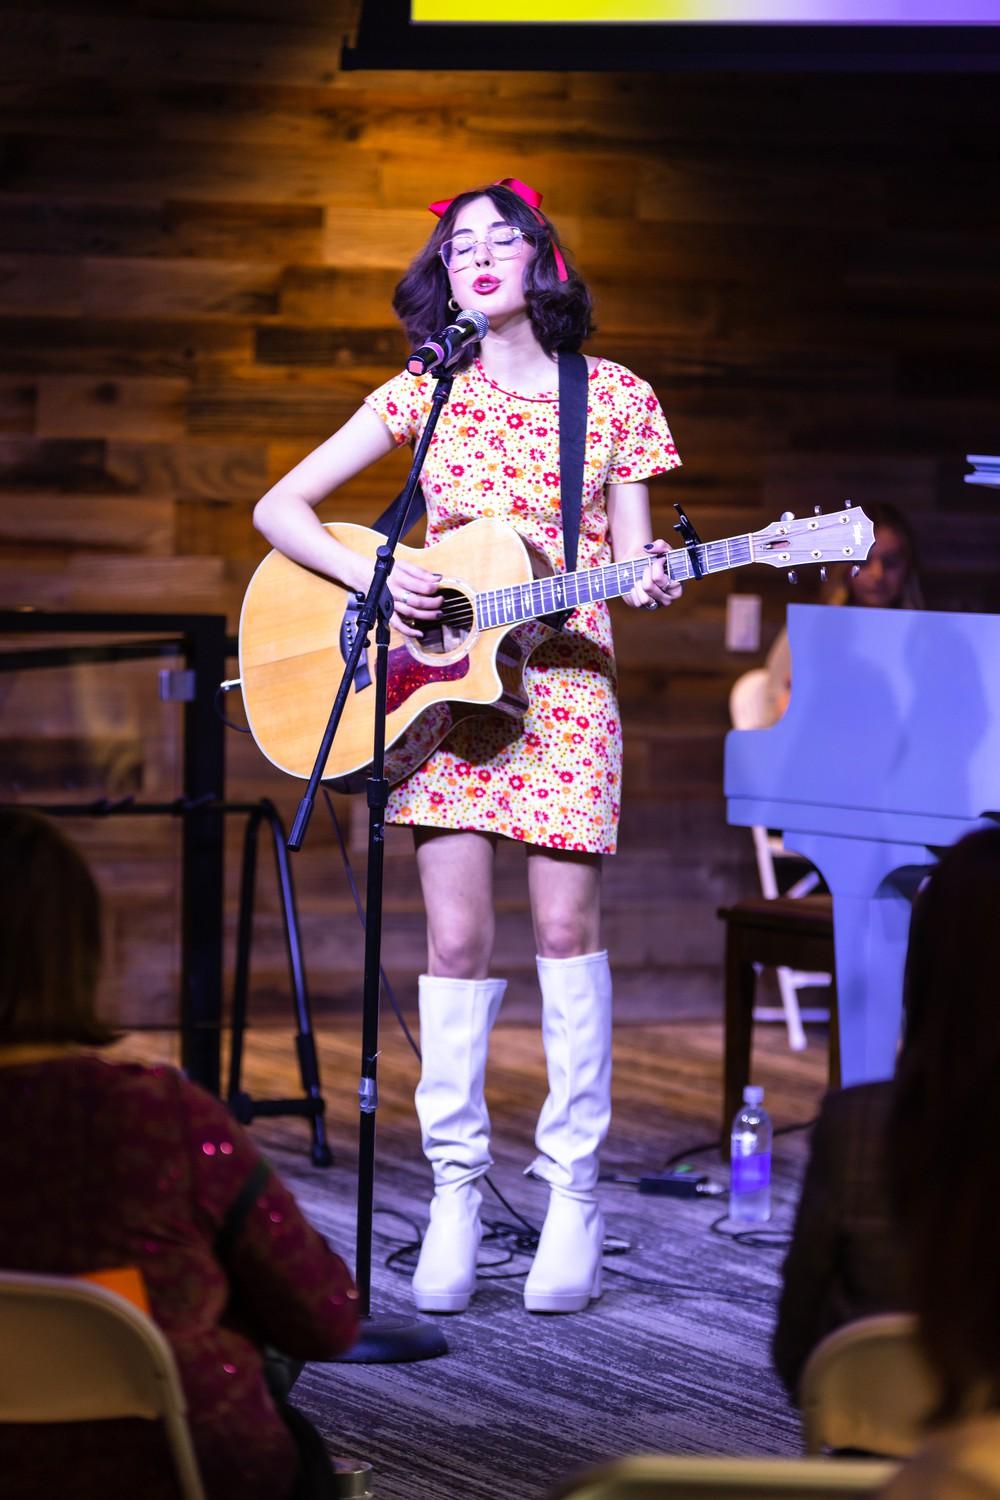 Special Edition Editor Beth Gonzales performs at the Lighthouse on March 23 for the "Peace Through Music" concert. Gonzales edited the special edition with the theme of music.